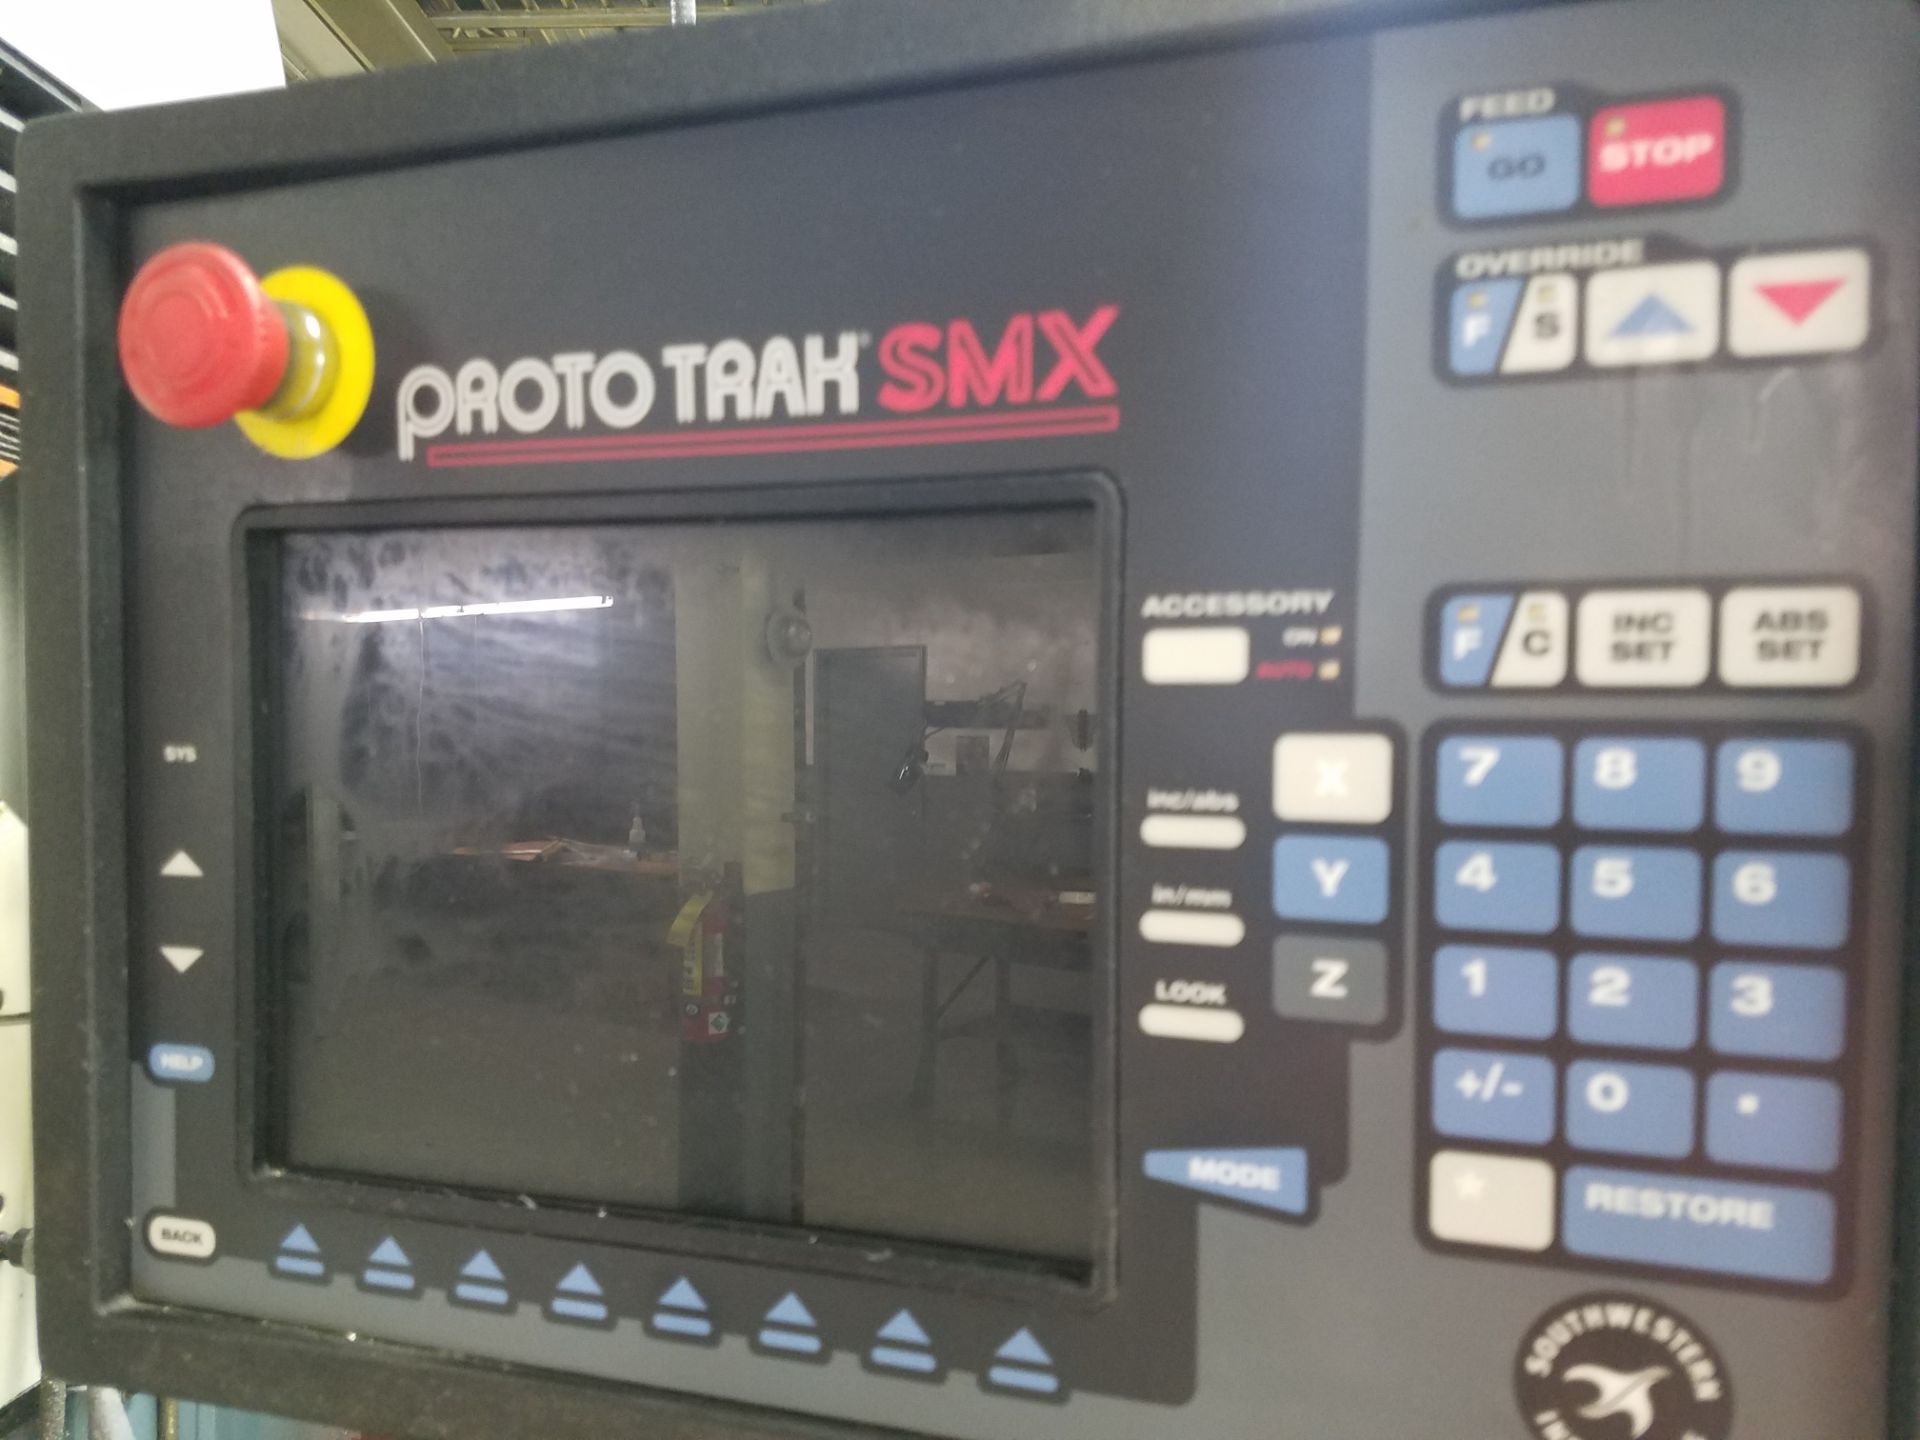 SWI Prototrak Model DPM-3 CNC Bed Mill, s/n 054CF13974, New 2005, SMX 3-Axis Control, Power Drawer - Image 3 of 6